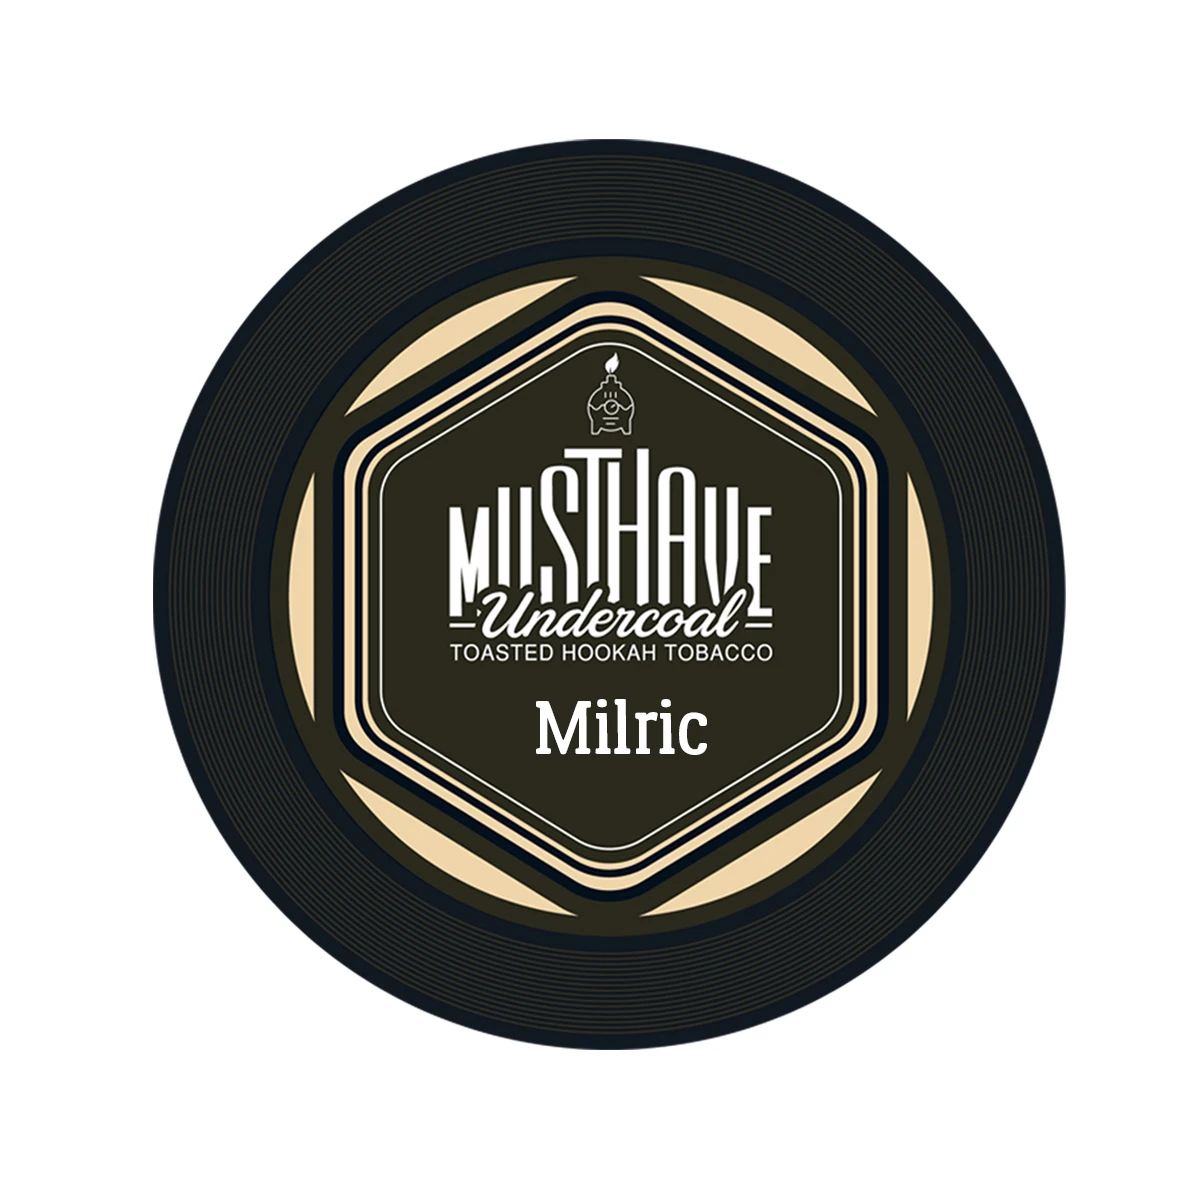 Musthave Tabak 25g Milric